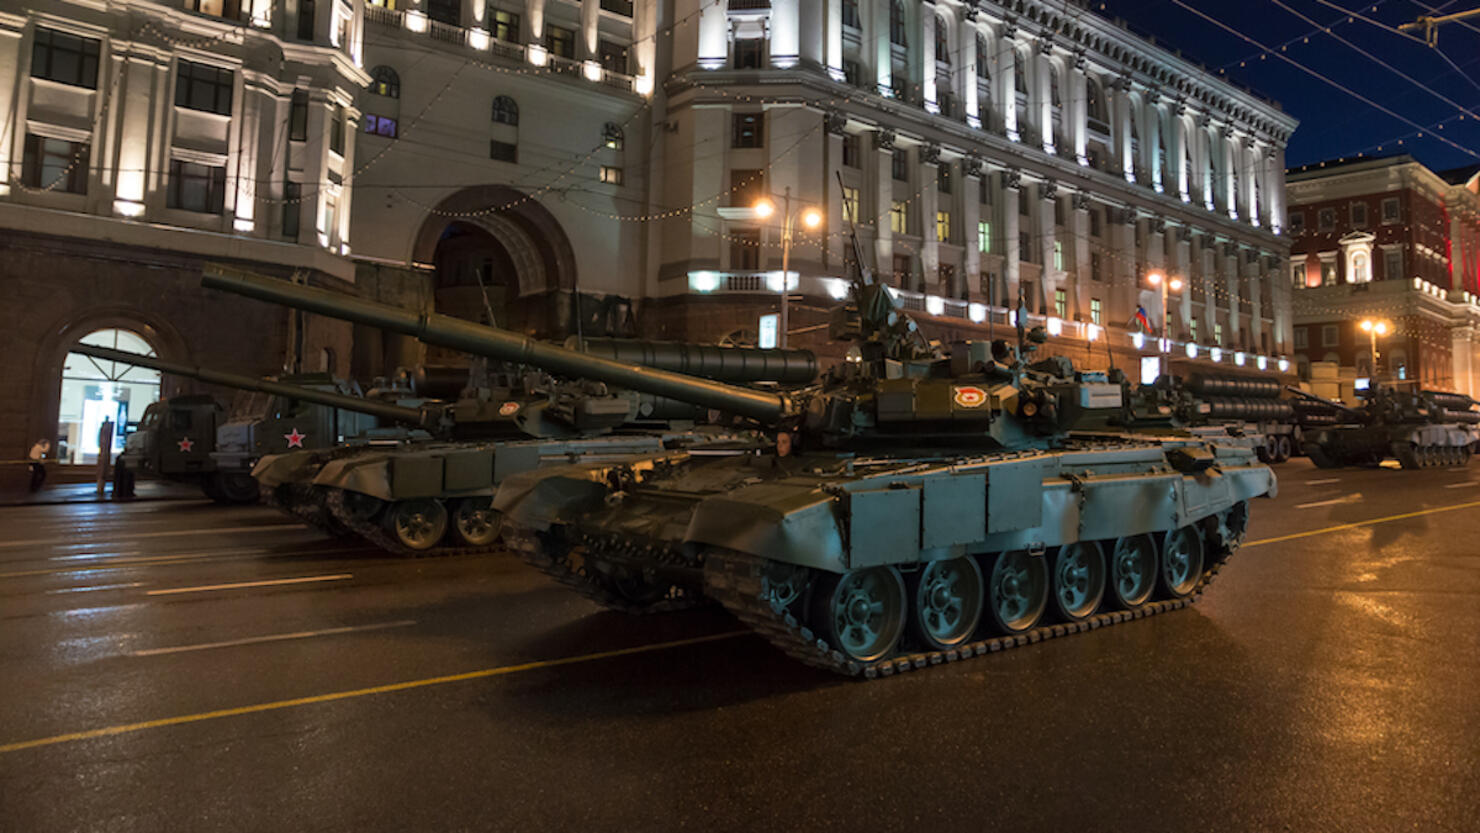 T-90 tanks, Russian battle tanks on the streets of Moscow, Russia